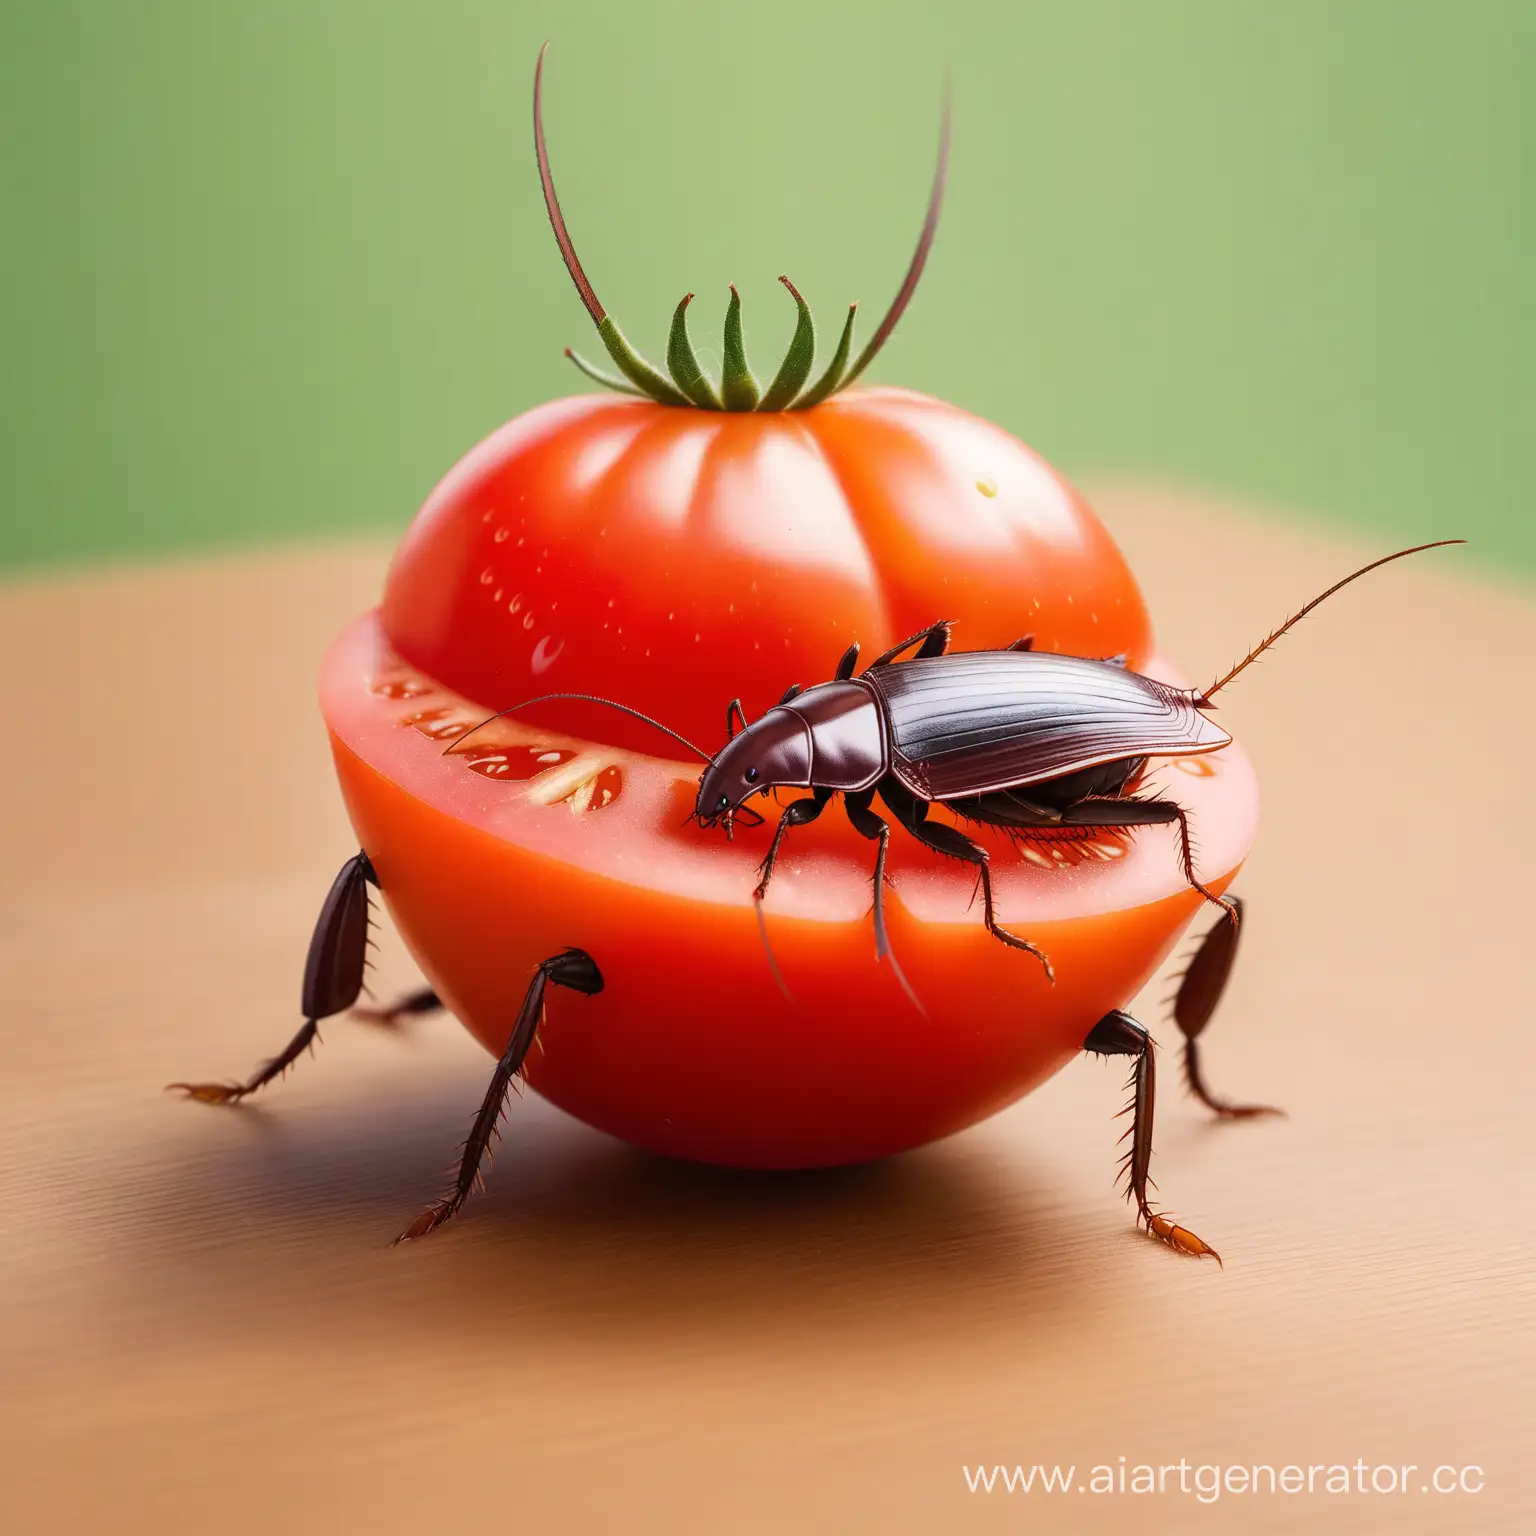 Armored-Cockroach-on-a-Tomato-Tiny-Warrior-Defends-its-Red-Kingdom